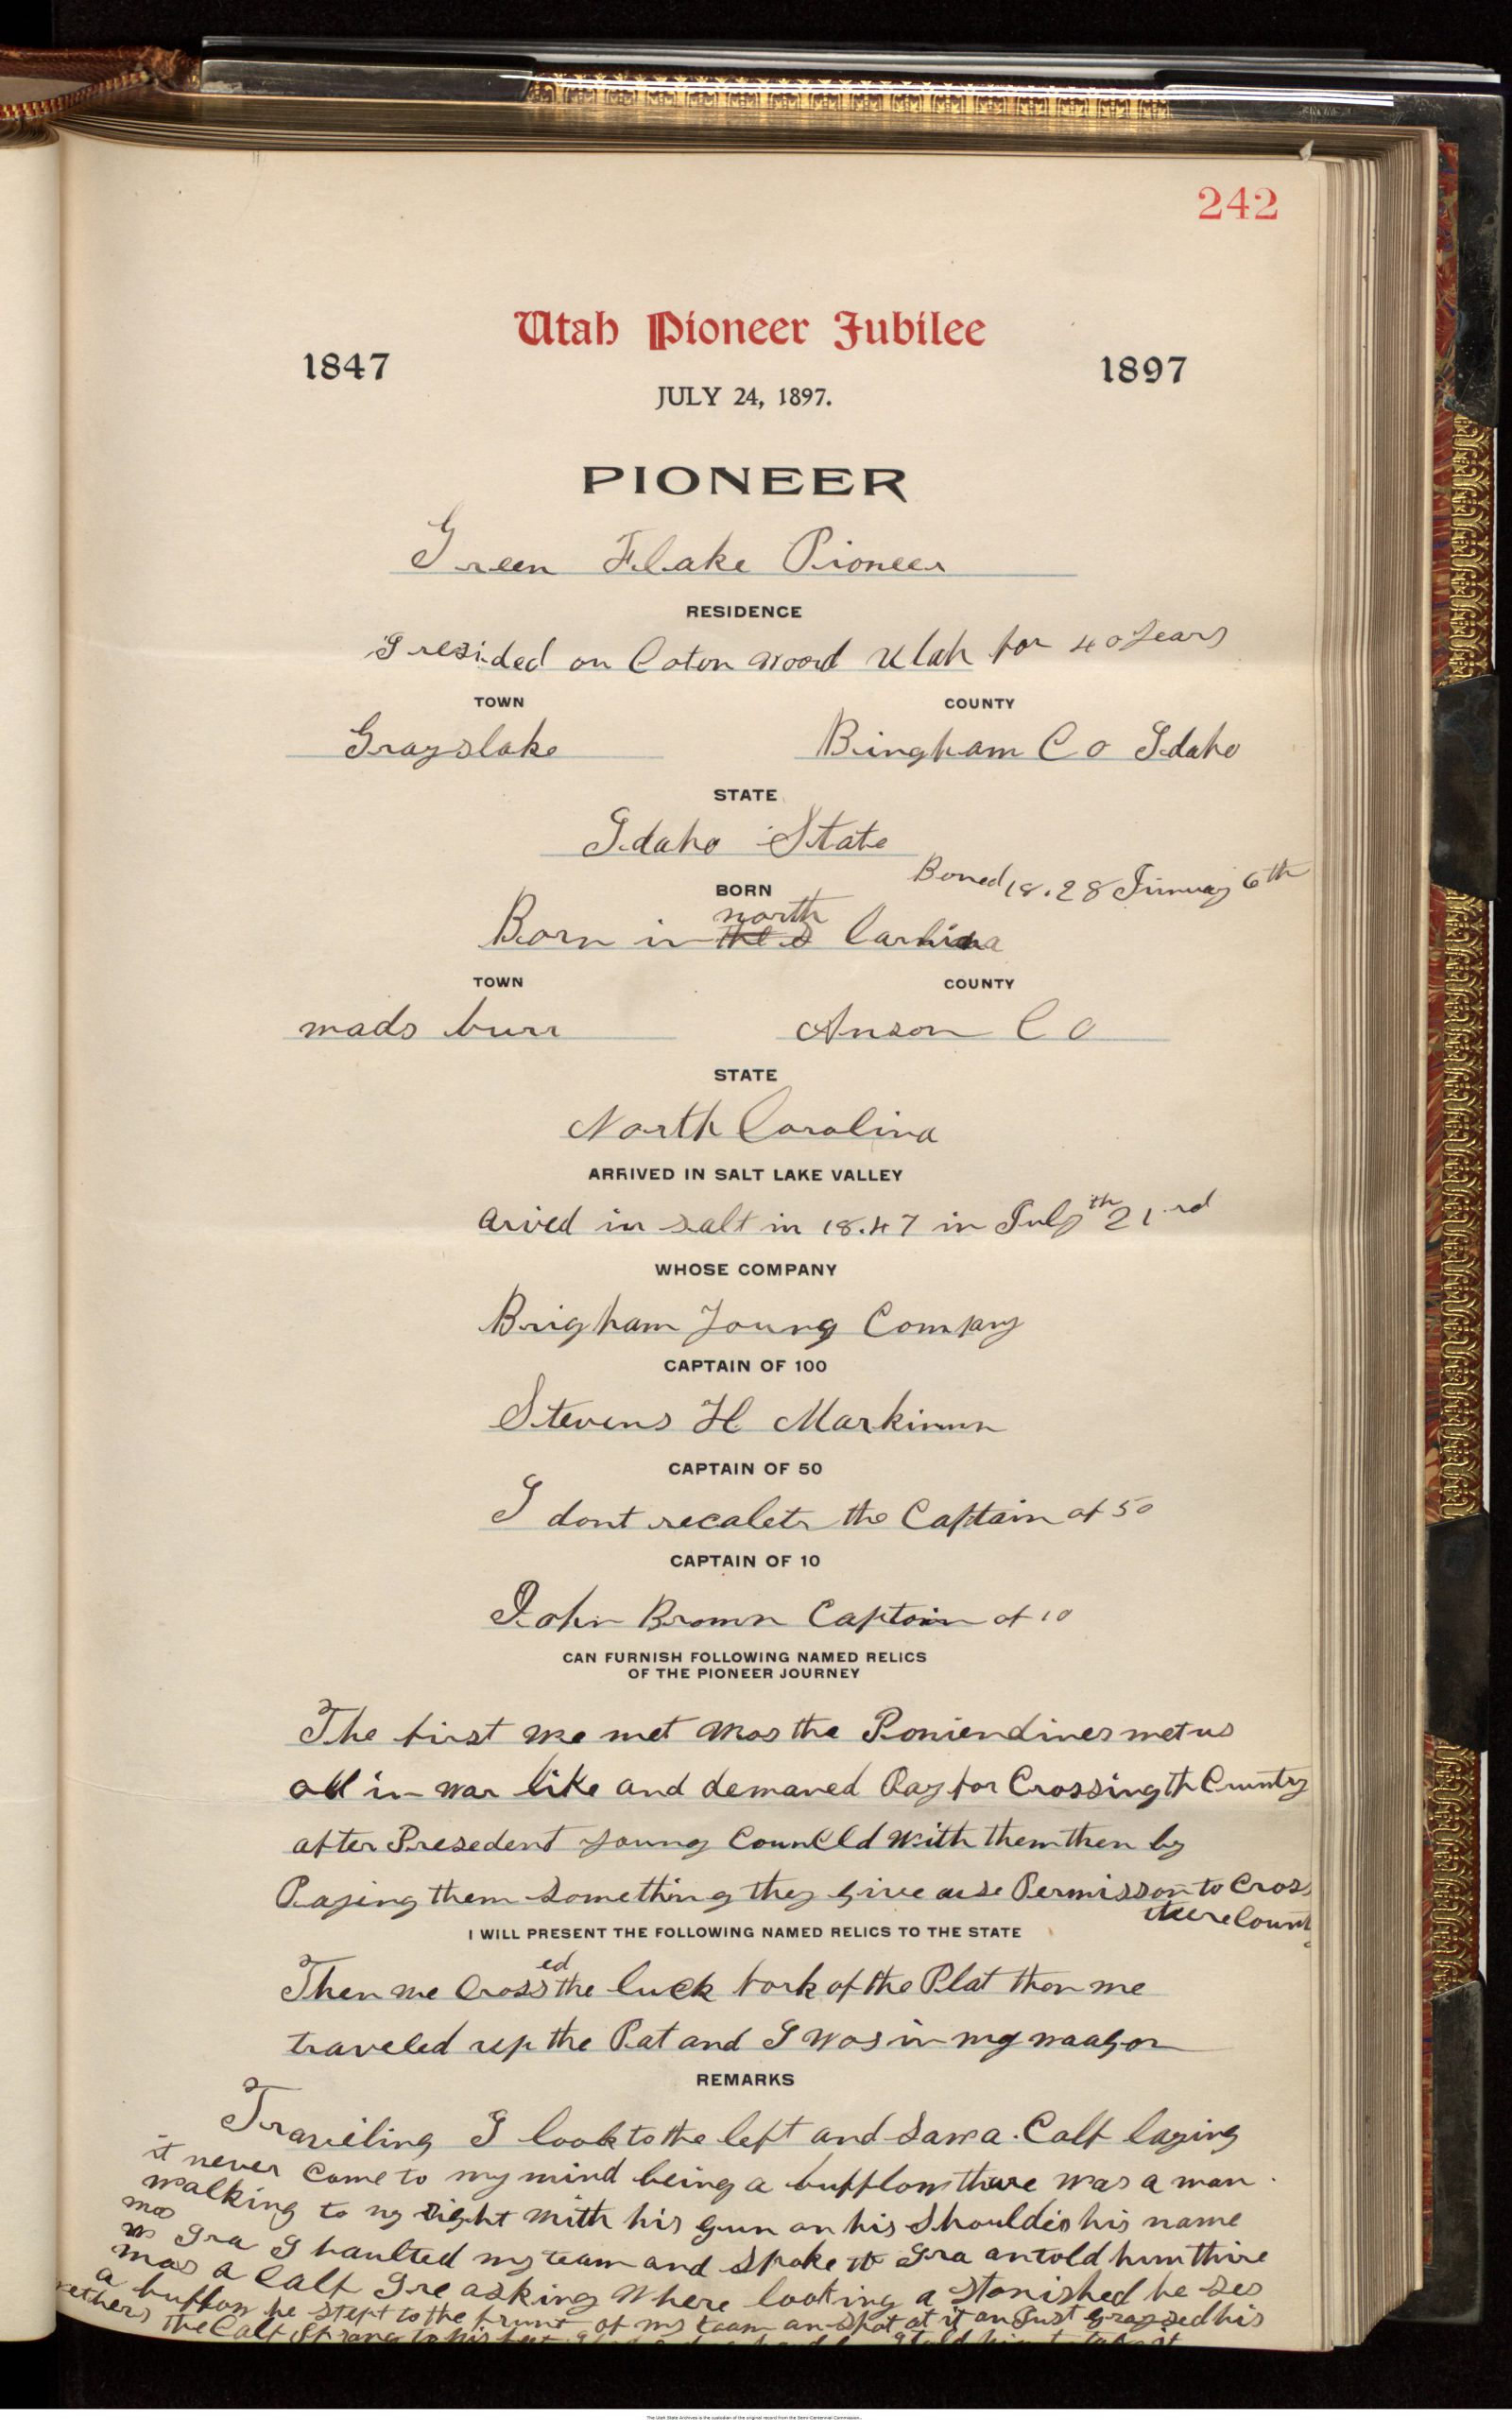 Page from the Book of the Pioneers that lists Green Flake